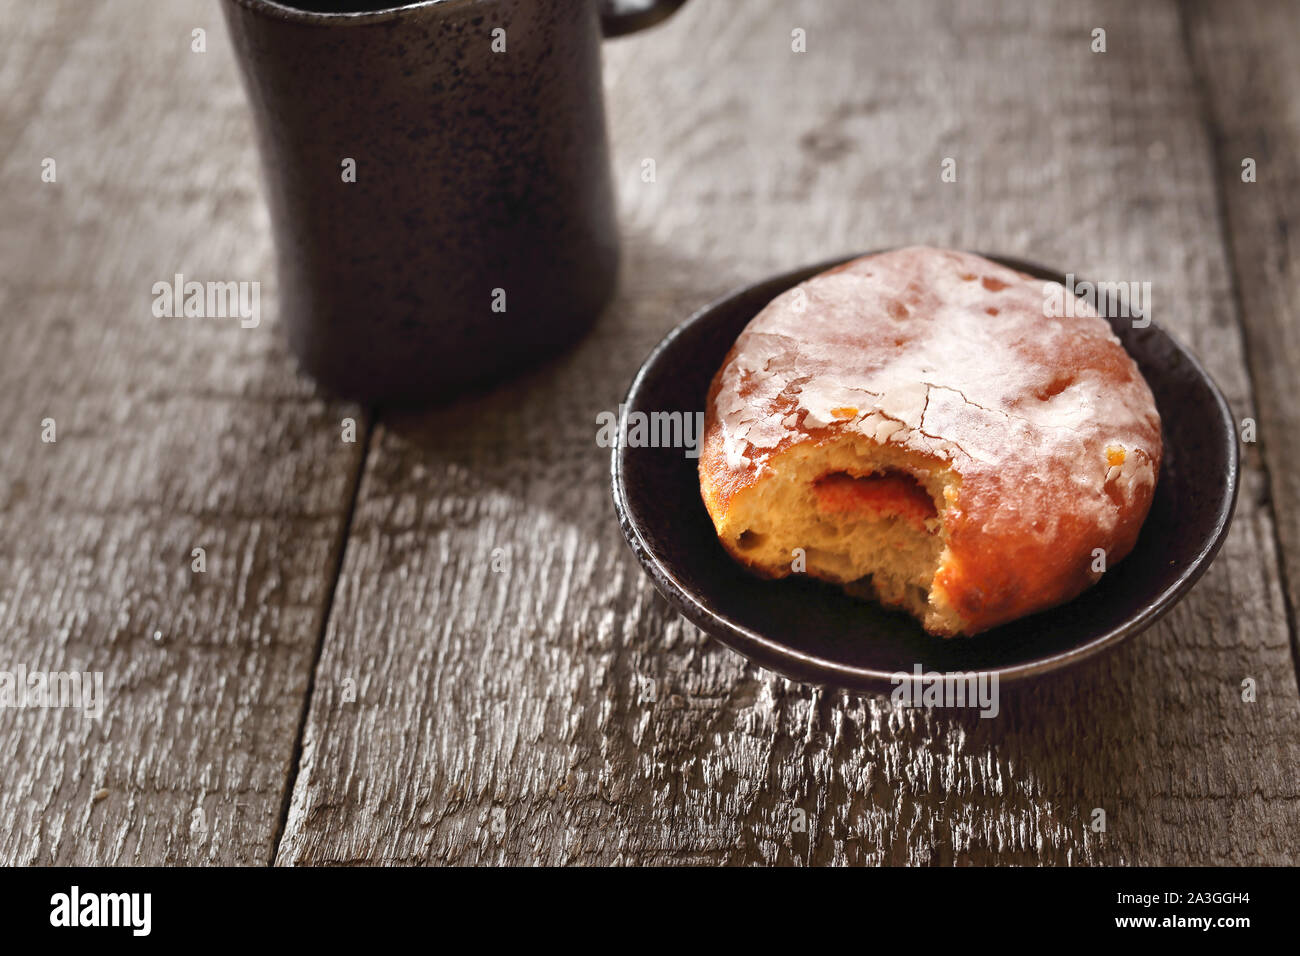 Traditional donuts with icing stuffed with marmalade. Stock Photo